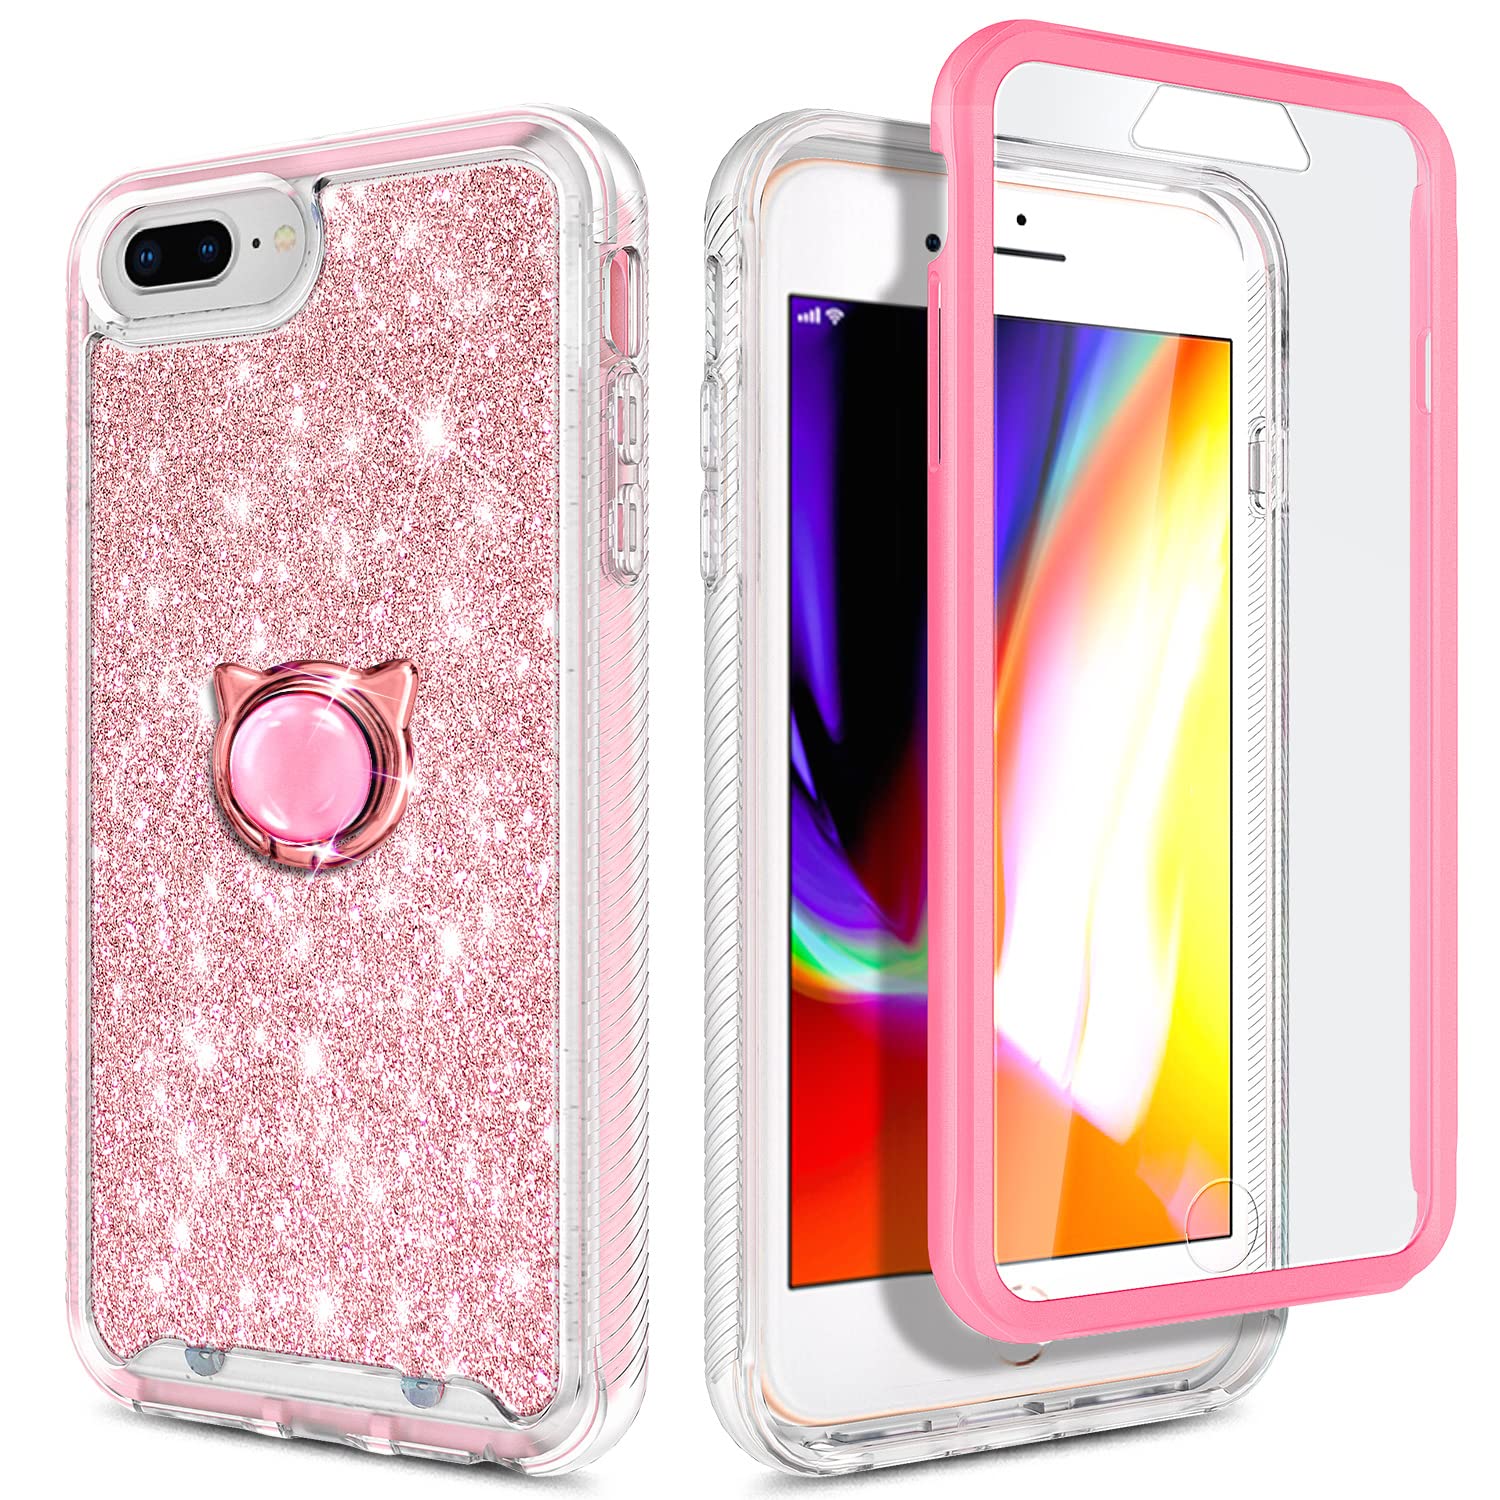 NGB Supremacy Case for iPhone 8 Plus, iPhone 7 Plus /6 Plus /6S Plus, Full Body Protection [Built-in Screen Protector] Ring Holder/Wrist Strap, Slim Fit Shockproof Bumper Case (Glitter Rose Gold)